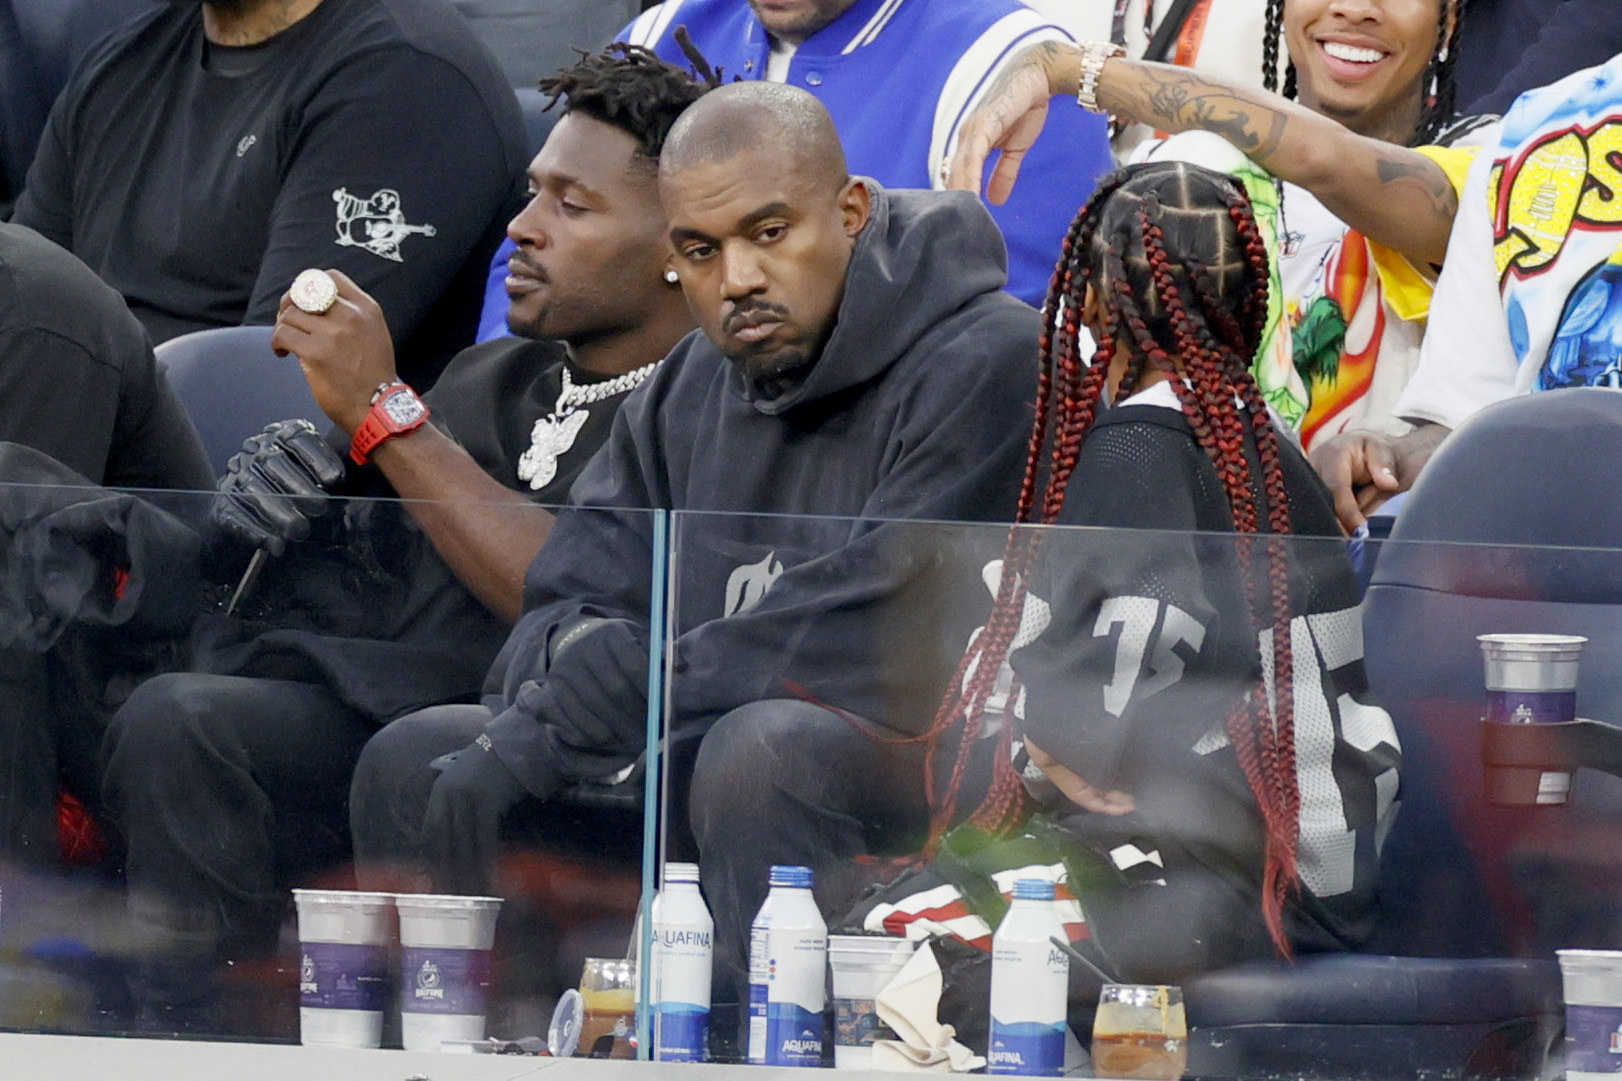 Antonio Brown, Kanye West, and North West at the Super Bowl